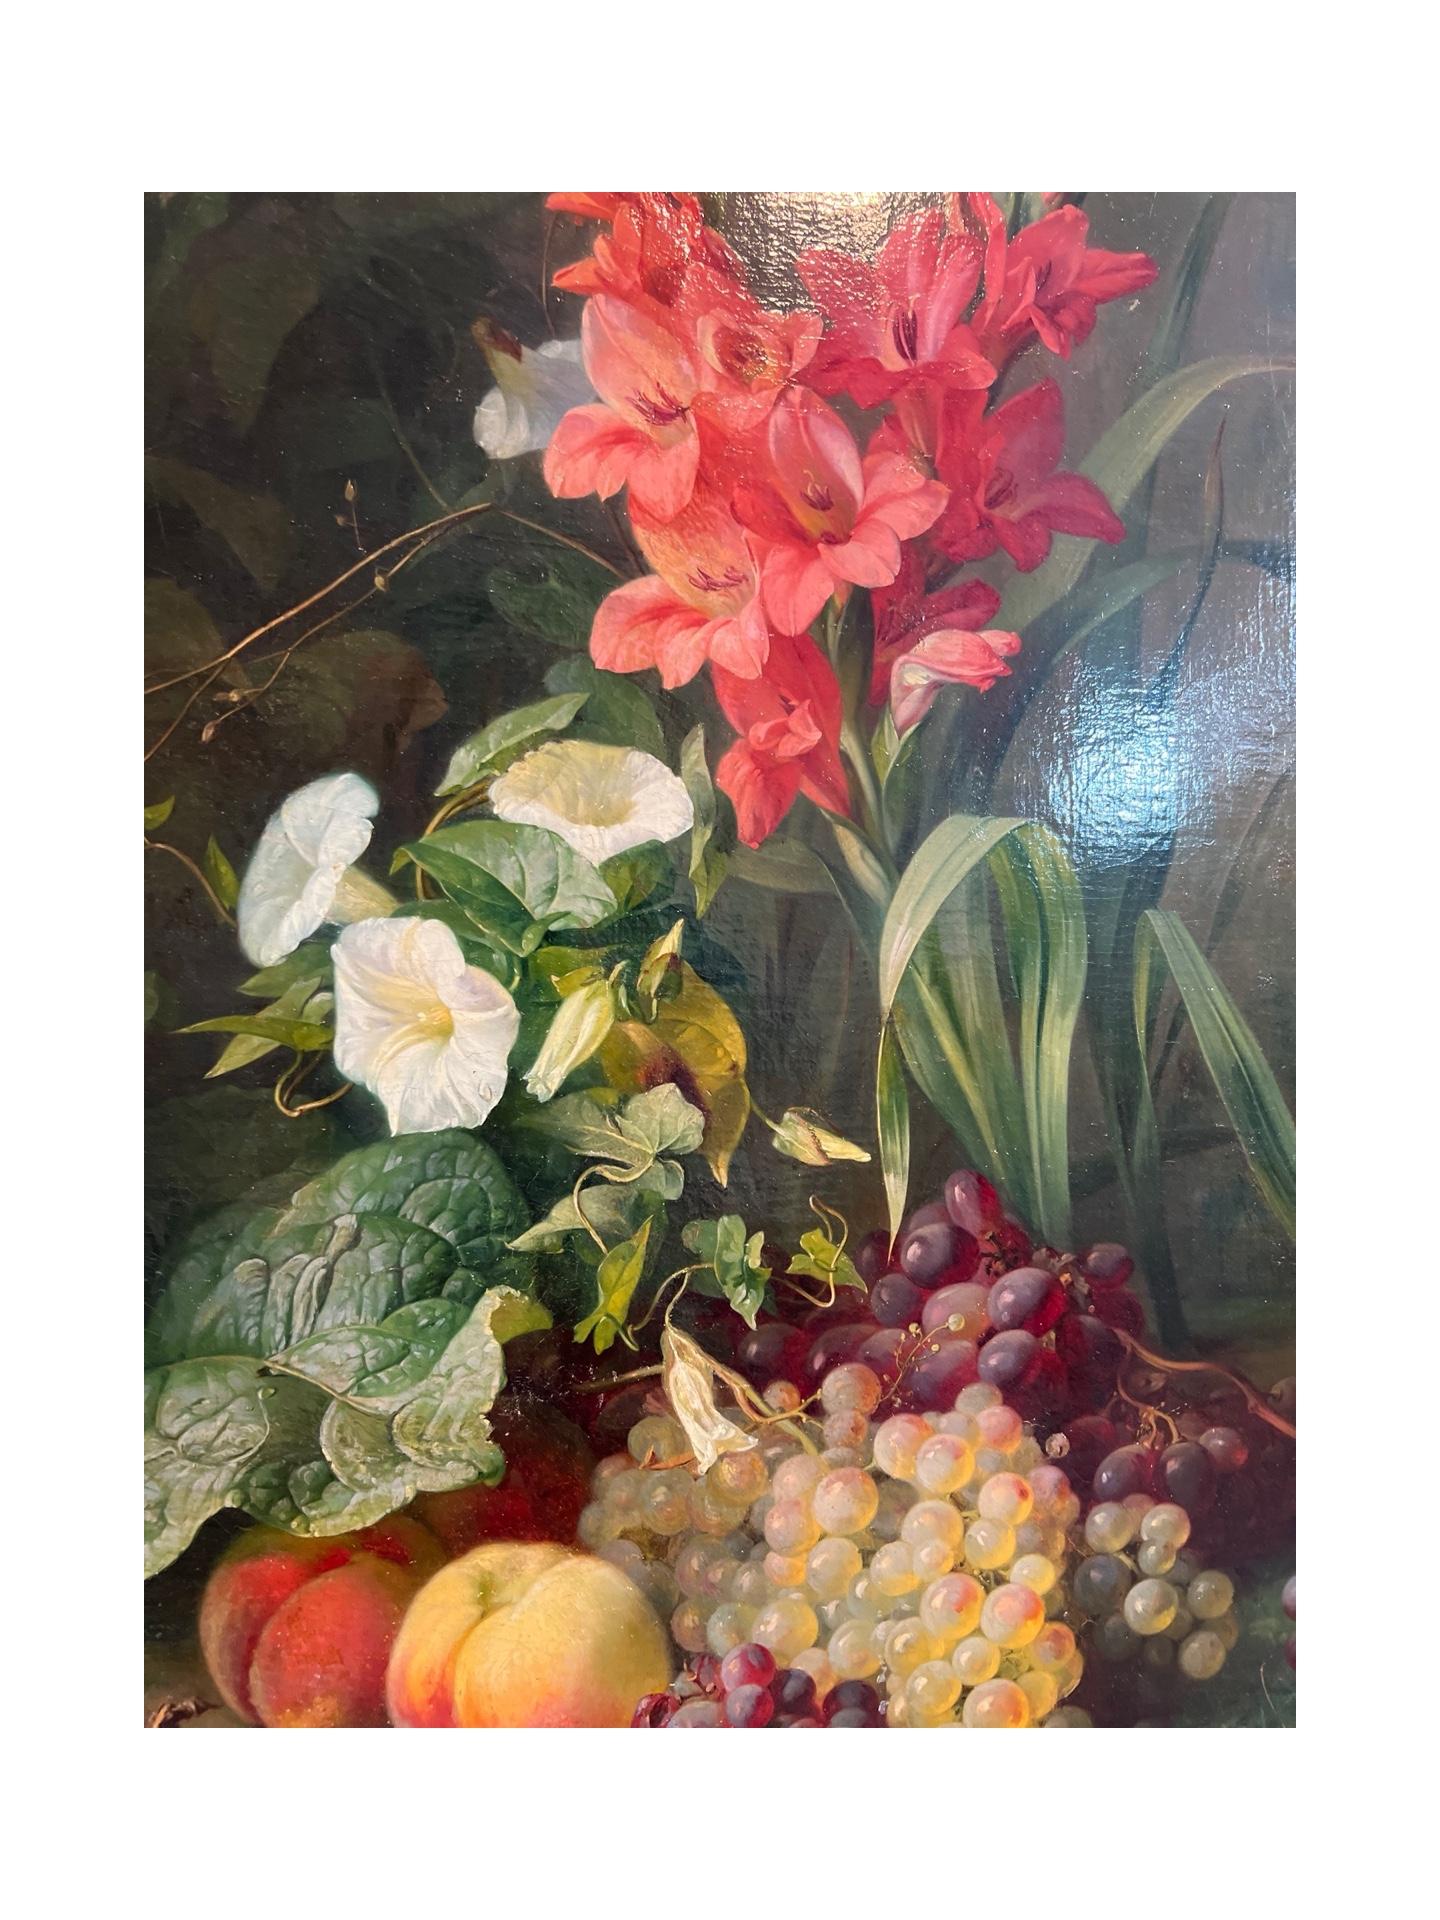 19th Century Elise Puyroche-Wagner (German, 1828-1895), Floral Naturalistic Painting C. 1853 For Sale